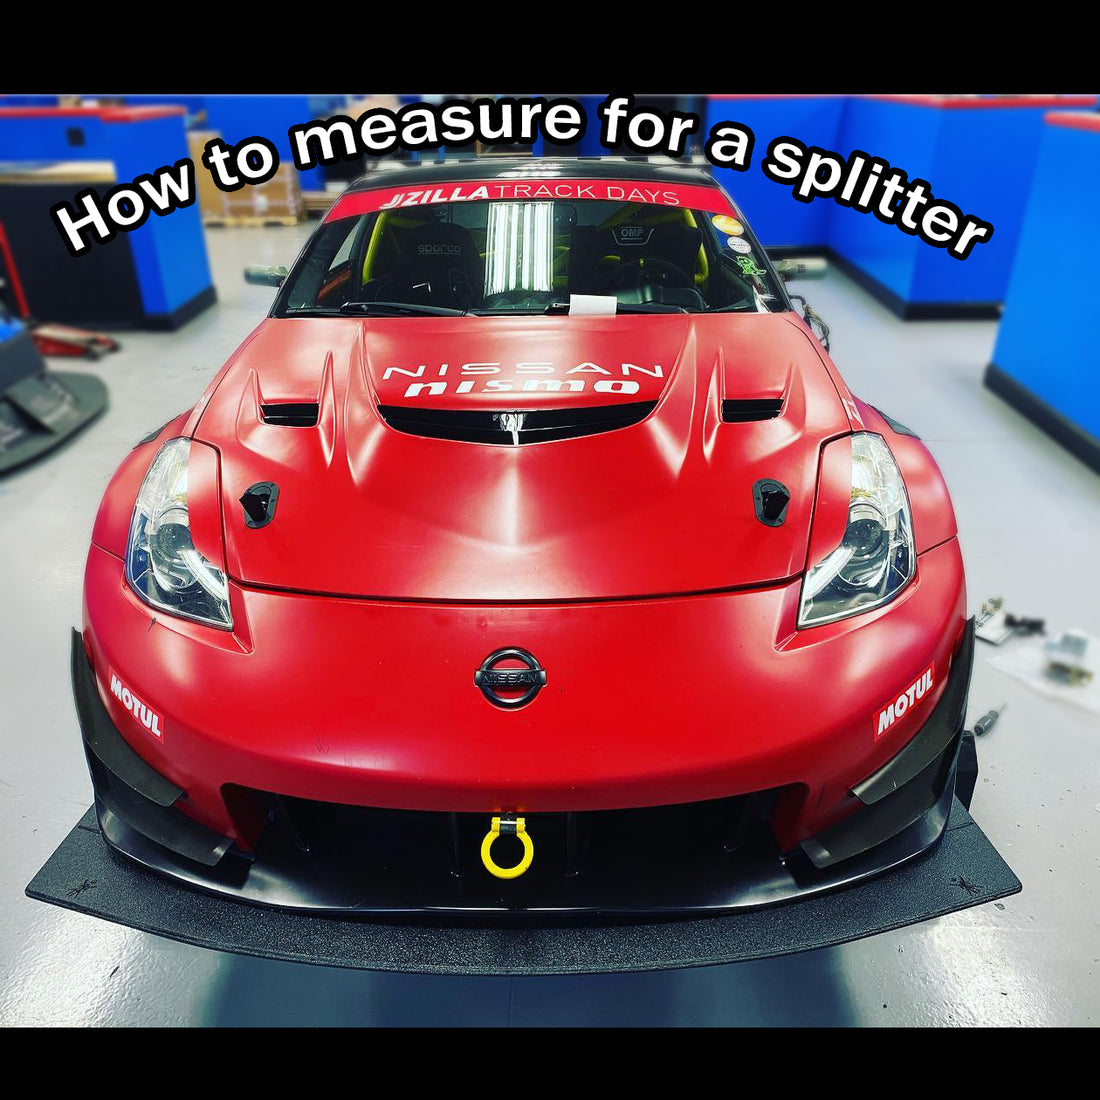 How to make a splitter template.